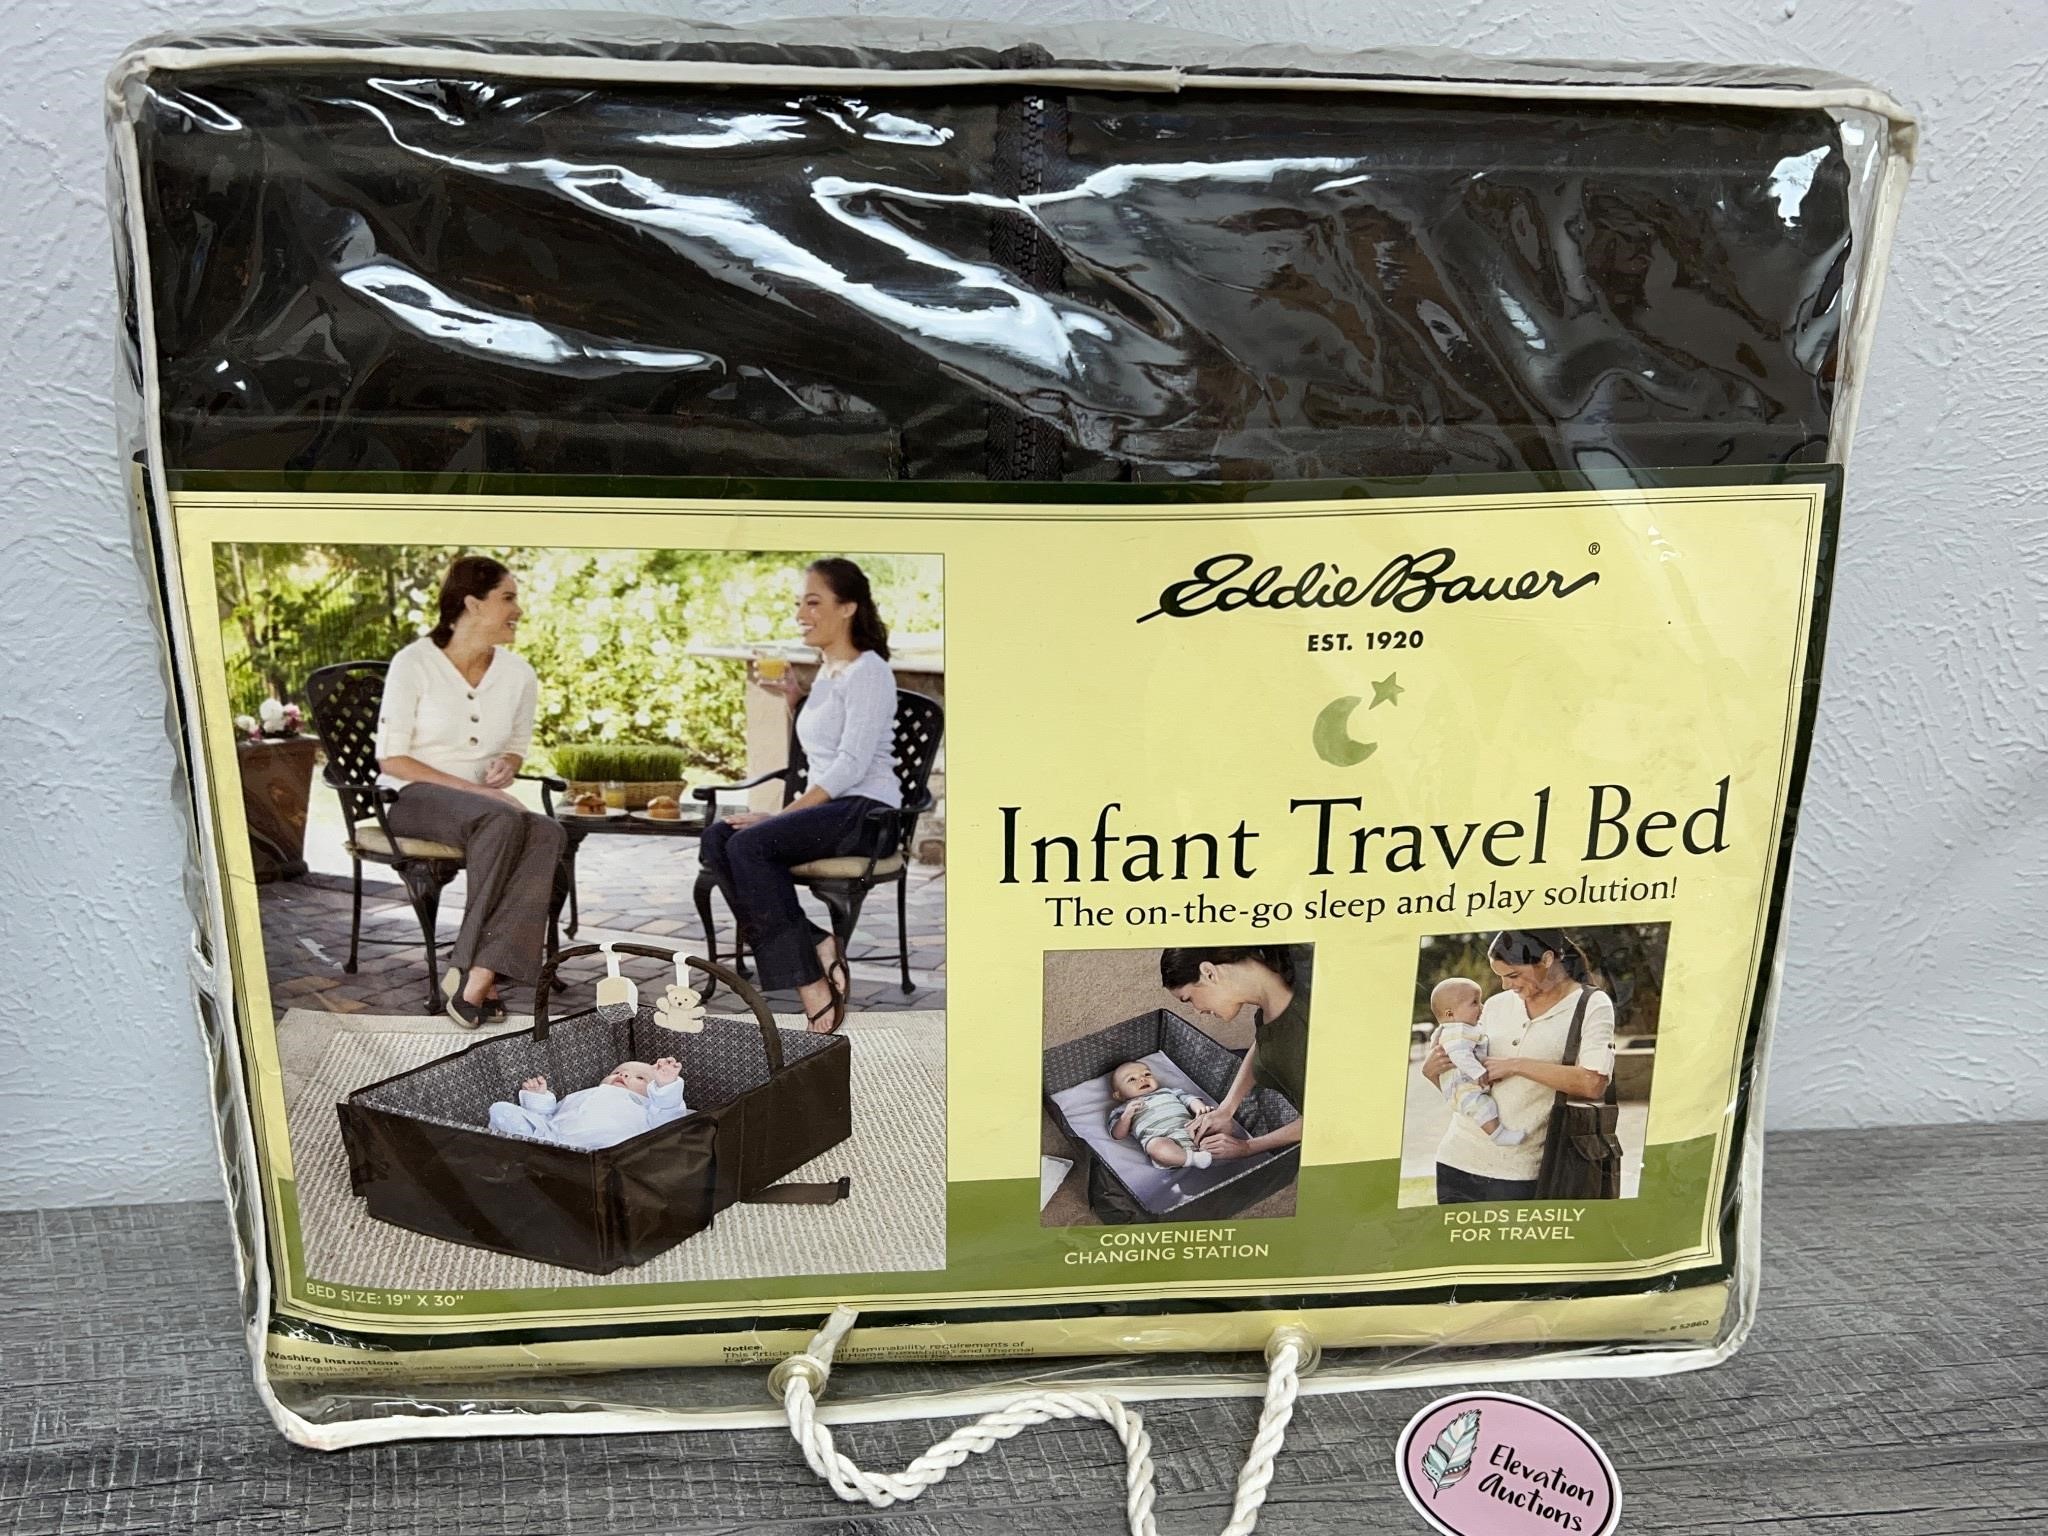 New infant travel bed